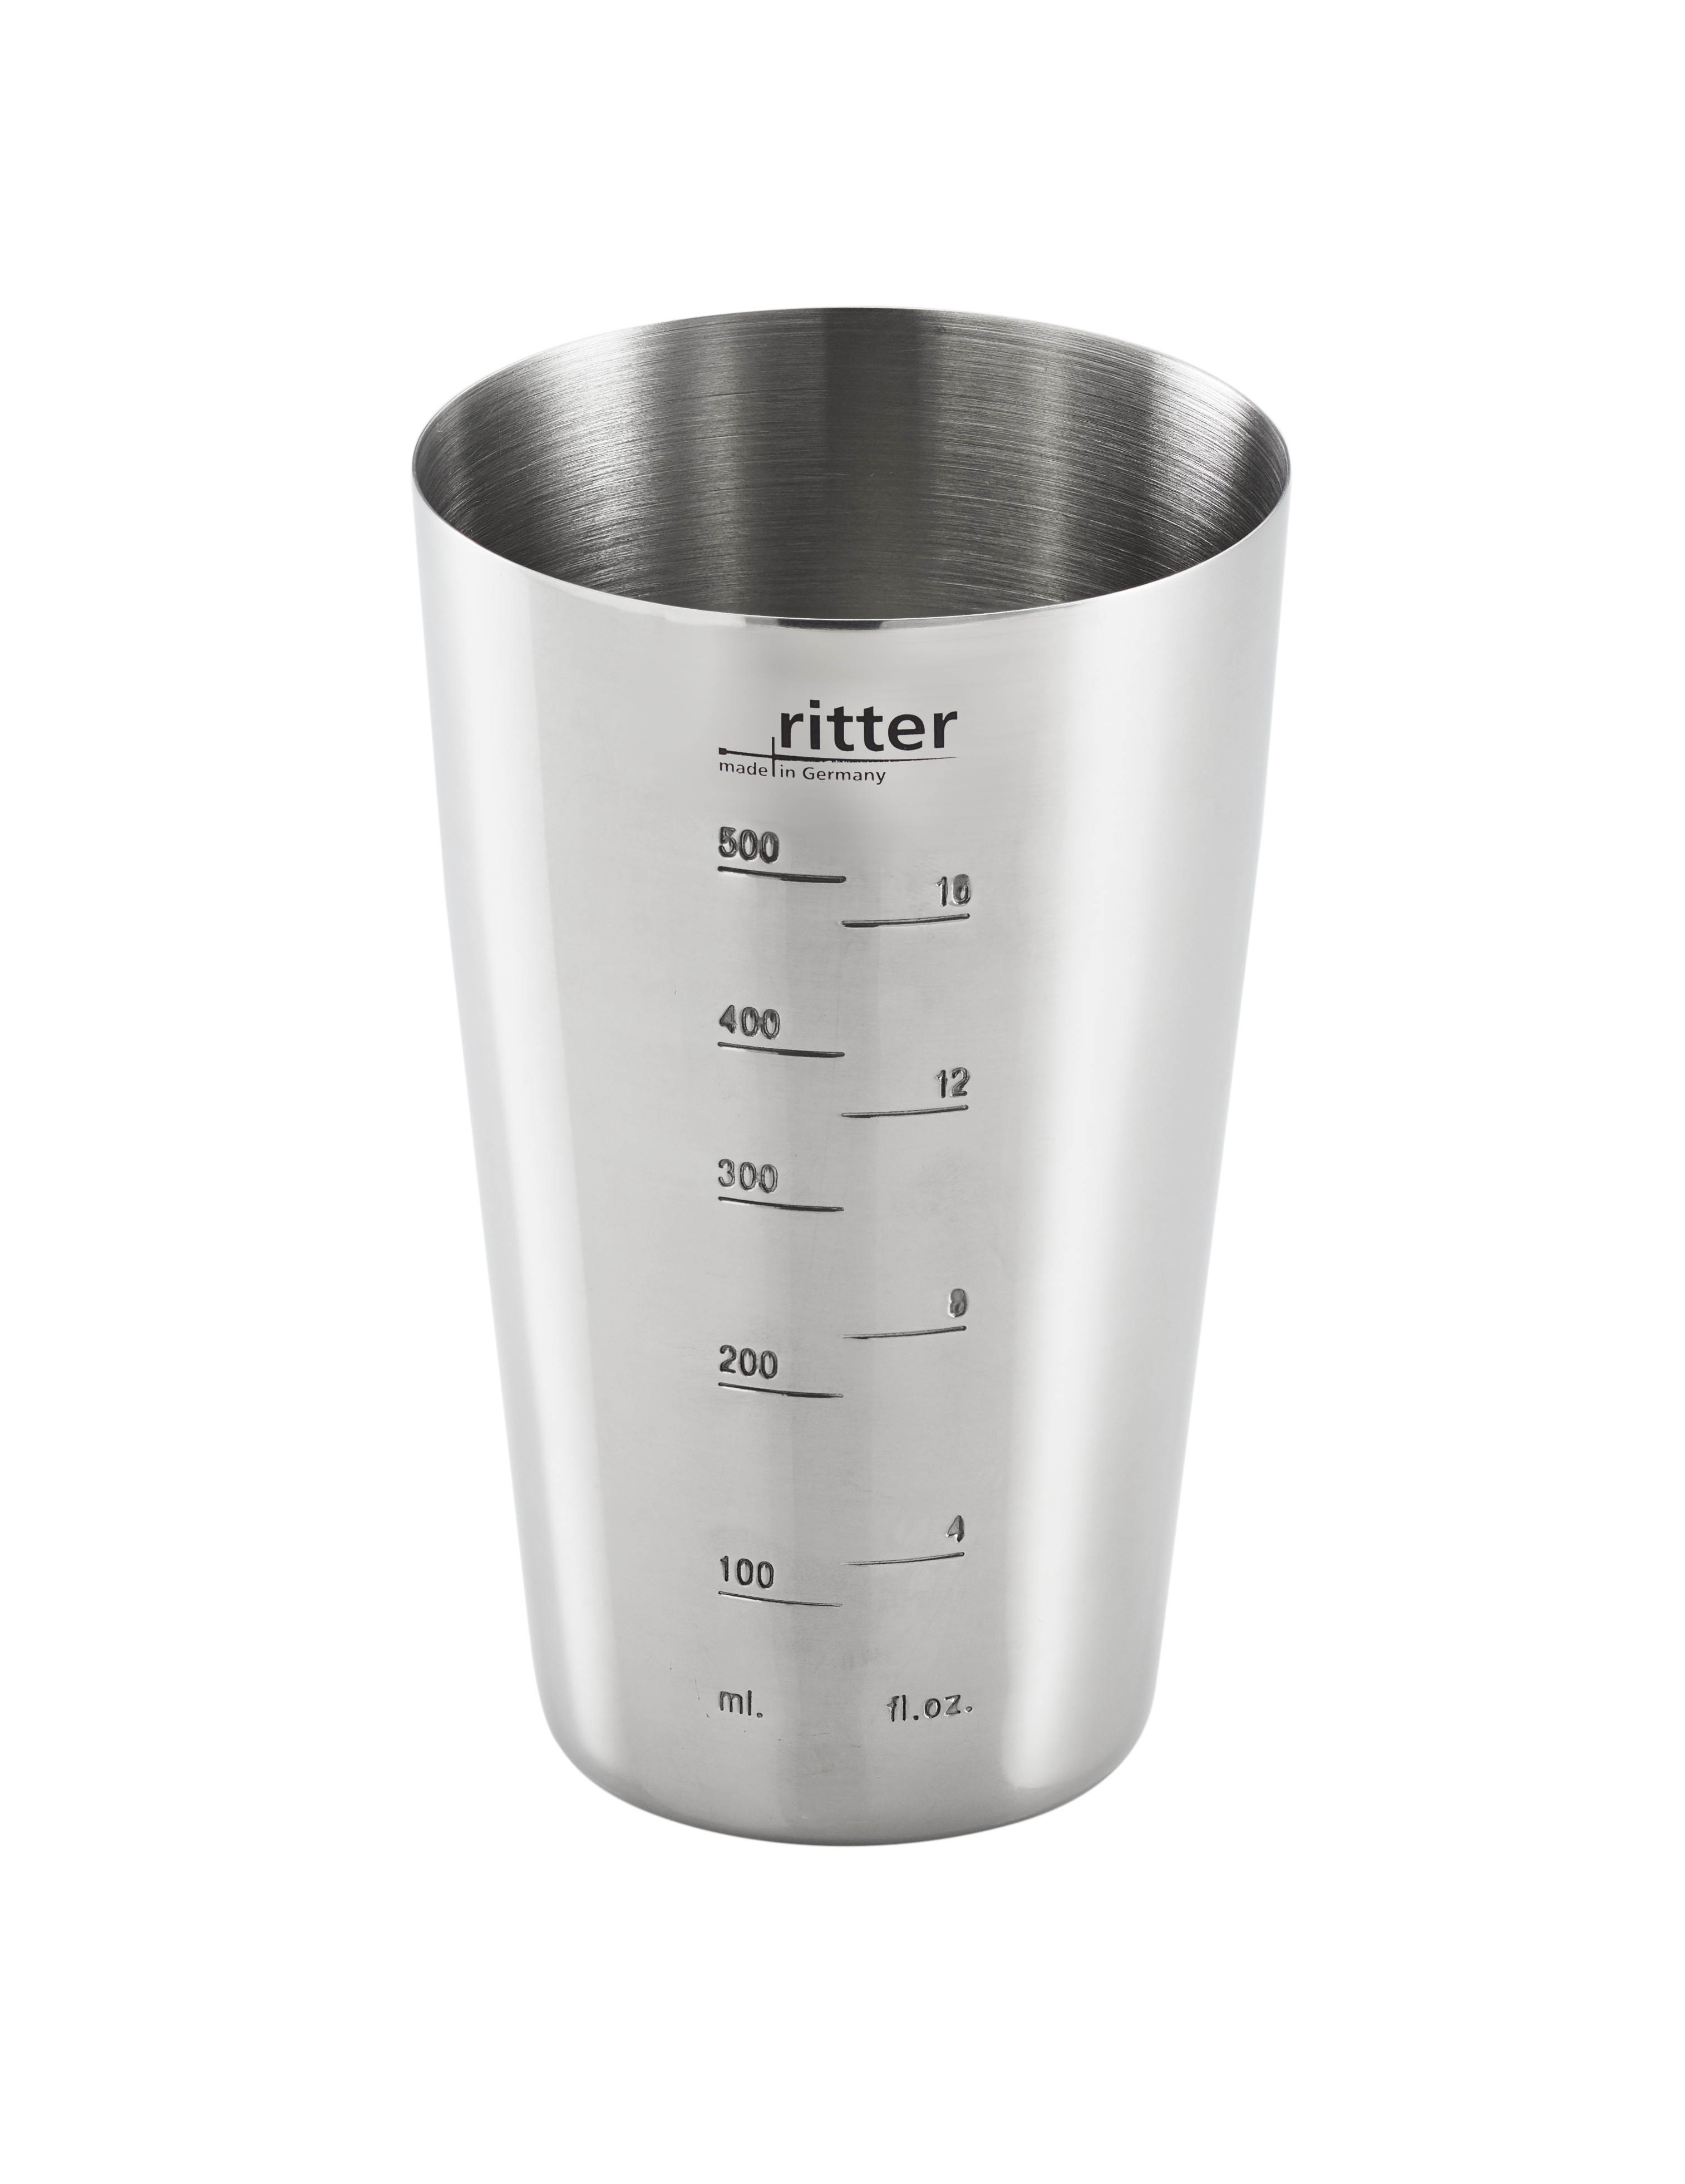 Blending cup made of stainless steel